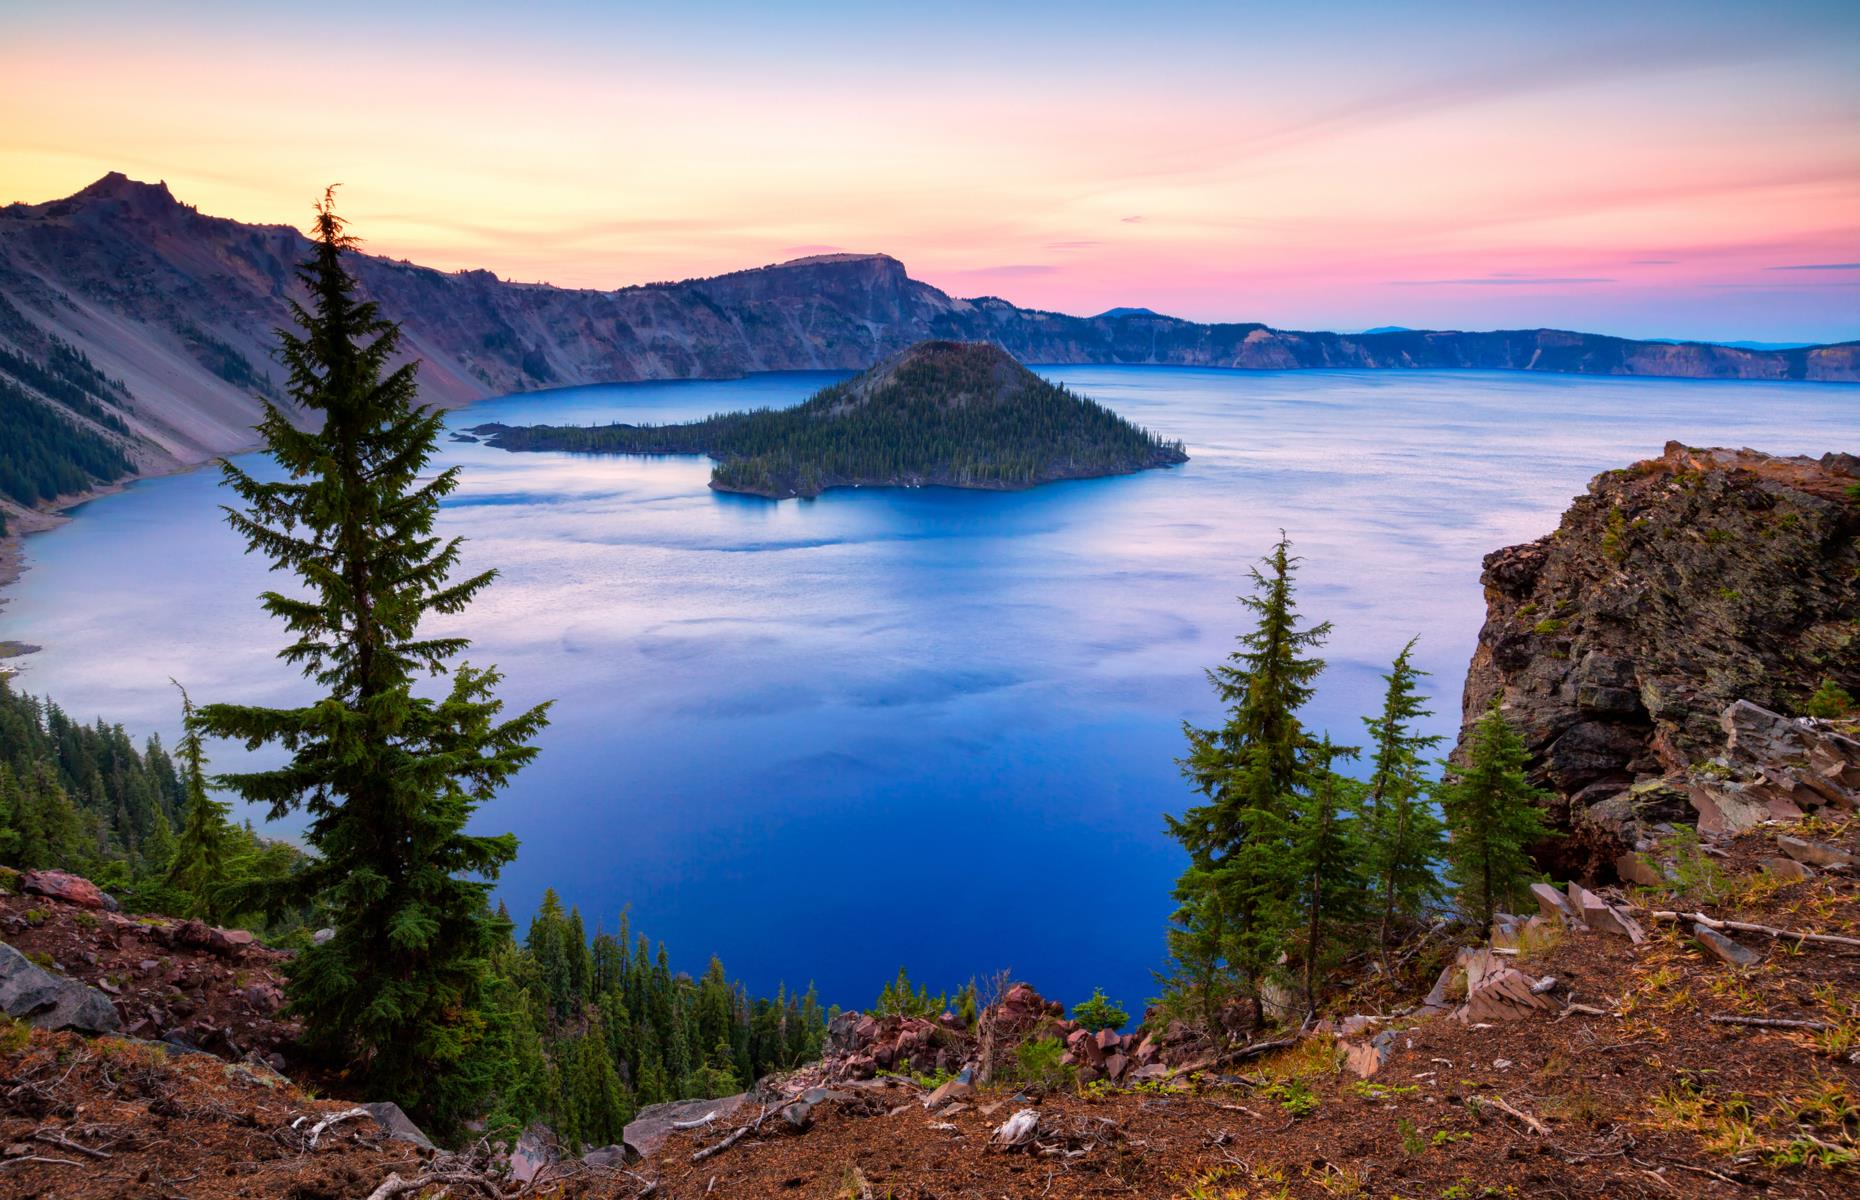 <p>Named for the bright blue Crater Lake (the deepest in the USA), <a href="https://www.nps.gov/crla/index.htm">this national park</a> is also beloved for its old-growth forests and wildflower meadows. The lake itself, formed by a volcanic eruption more than 7,000 years ago, is best viewed from the 33-mile (53km) Rim Drive – traveling all the way around the water, the route is punctured with scenic overlooks. The sight of cinder cone Wizard Island rising from the waters is one to remember.</p>  <p><a href="https://www.loveexploring.com/galleries/123234/american-beauties-the-best-national-park-in-every-state?page=1"><strong>American beauties: the best national park in every state</strong></a></p>